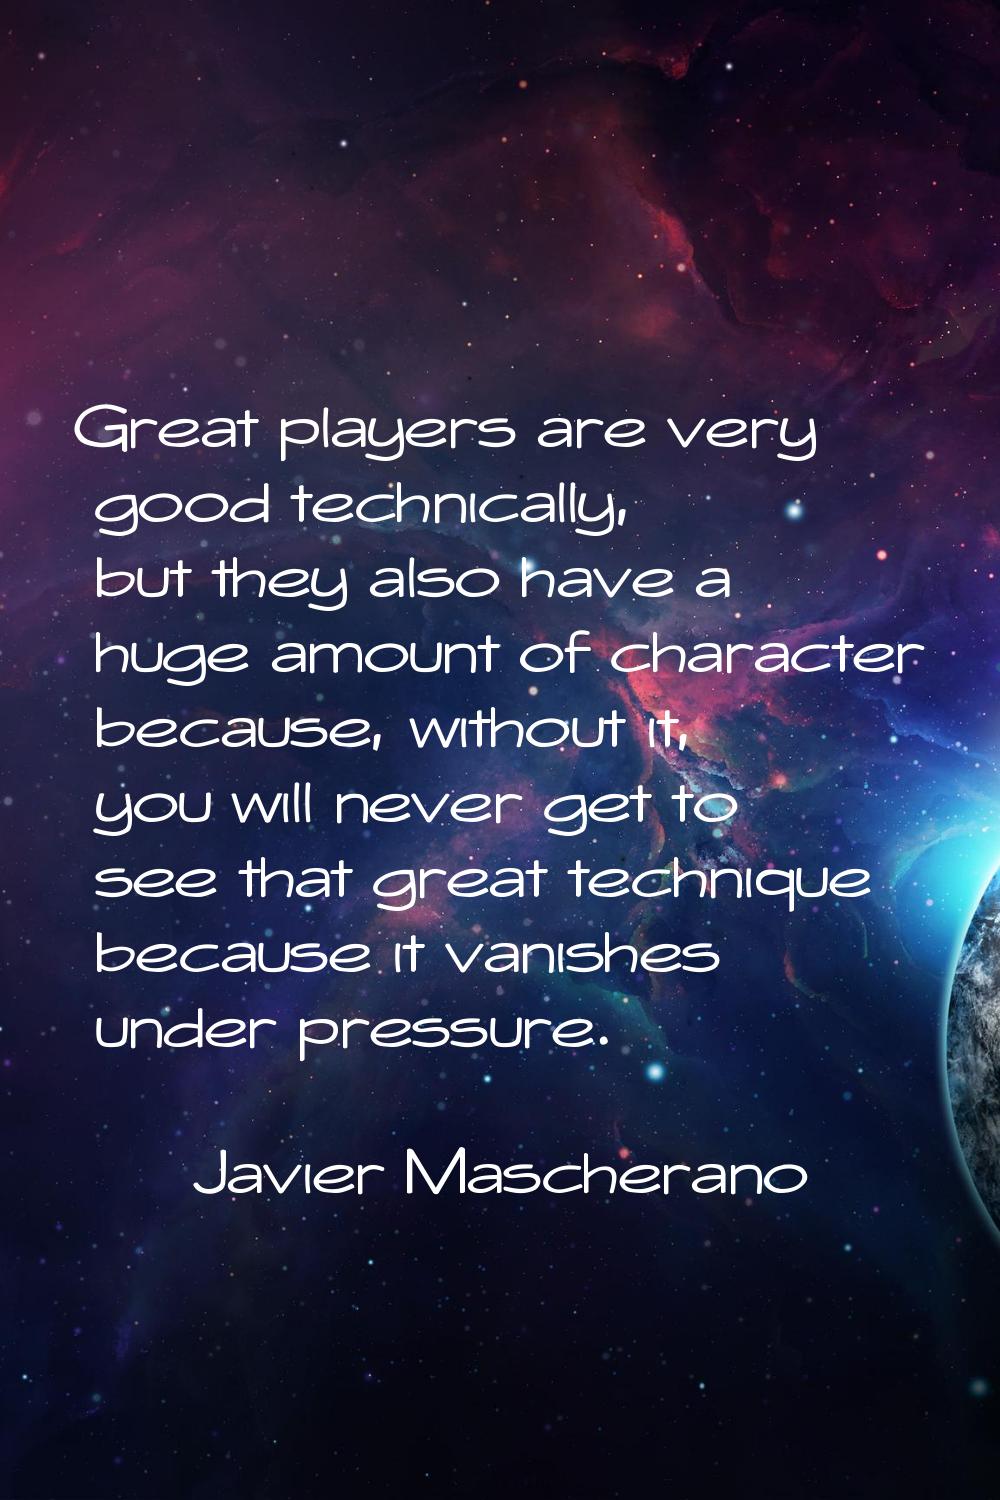 Great players are very good technically, but they also have a huge amount of character because, wit